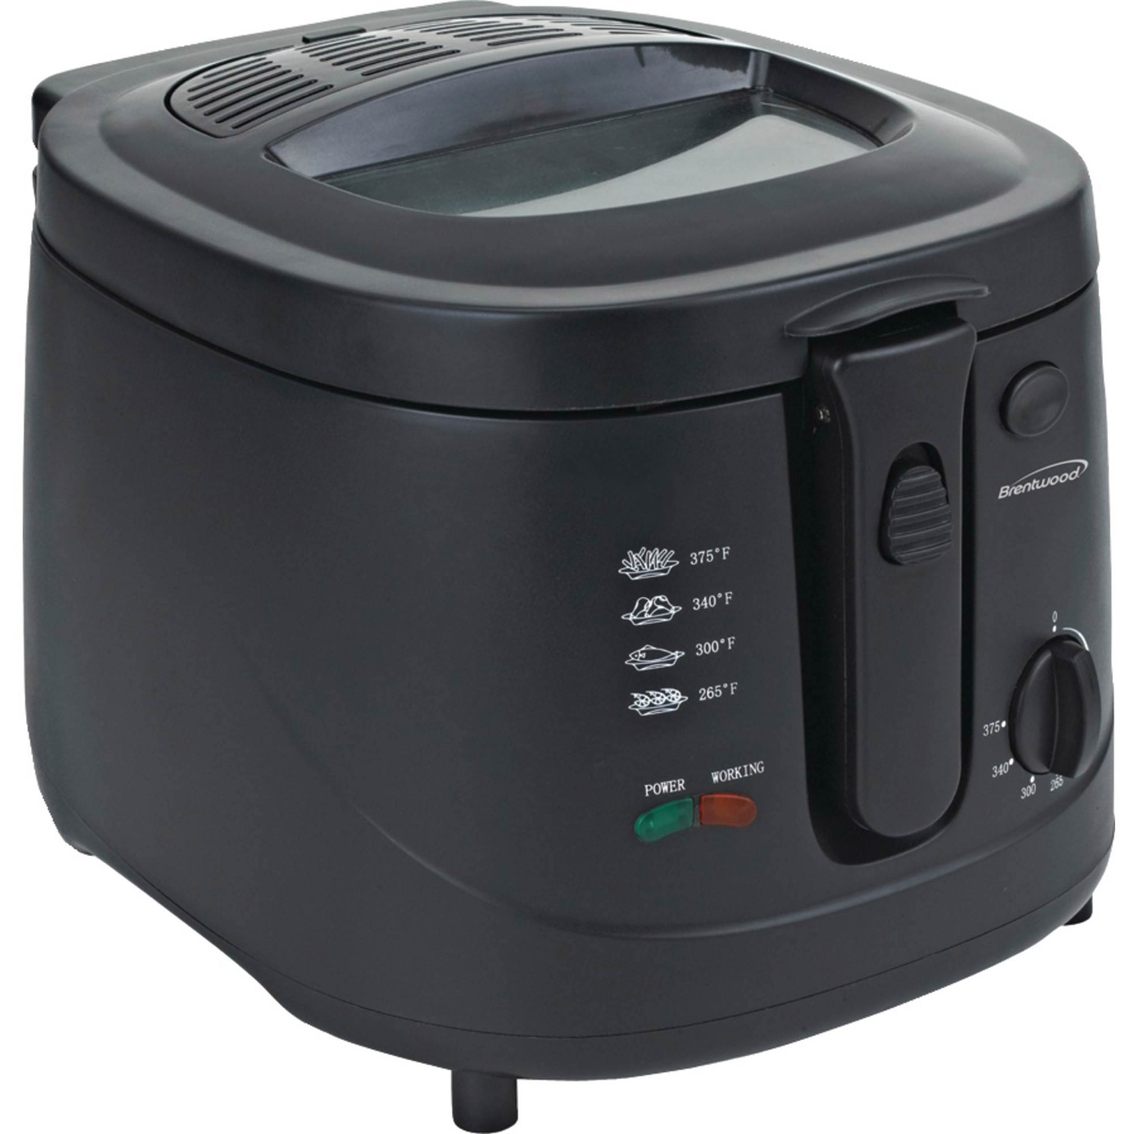 Brentwood 12 Cup Electric Deep Fryer - Image 2 of 9